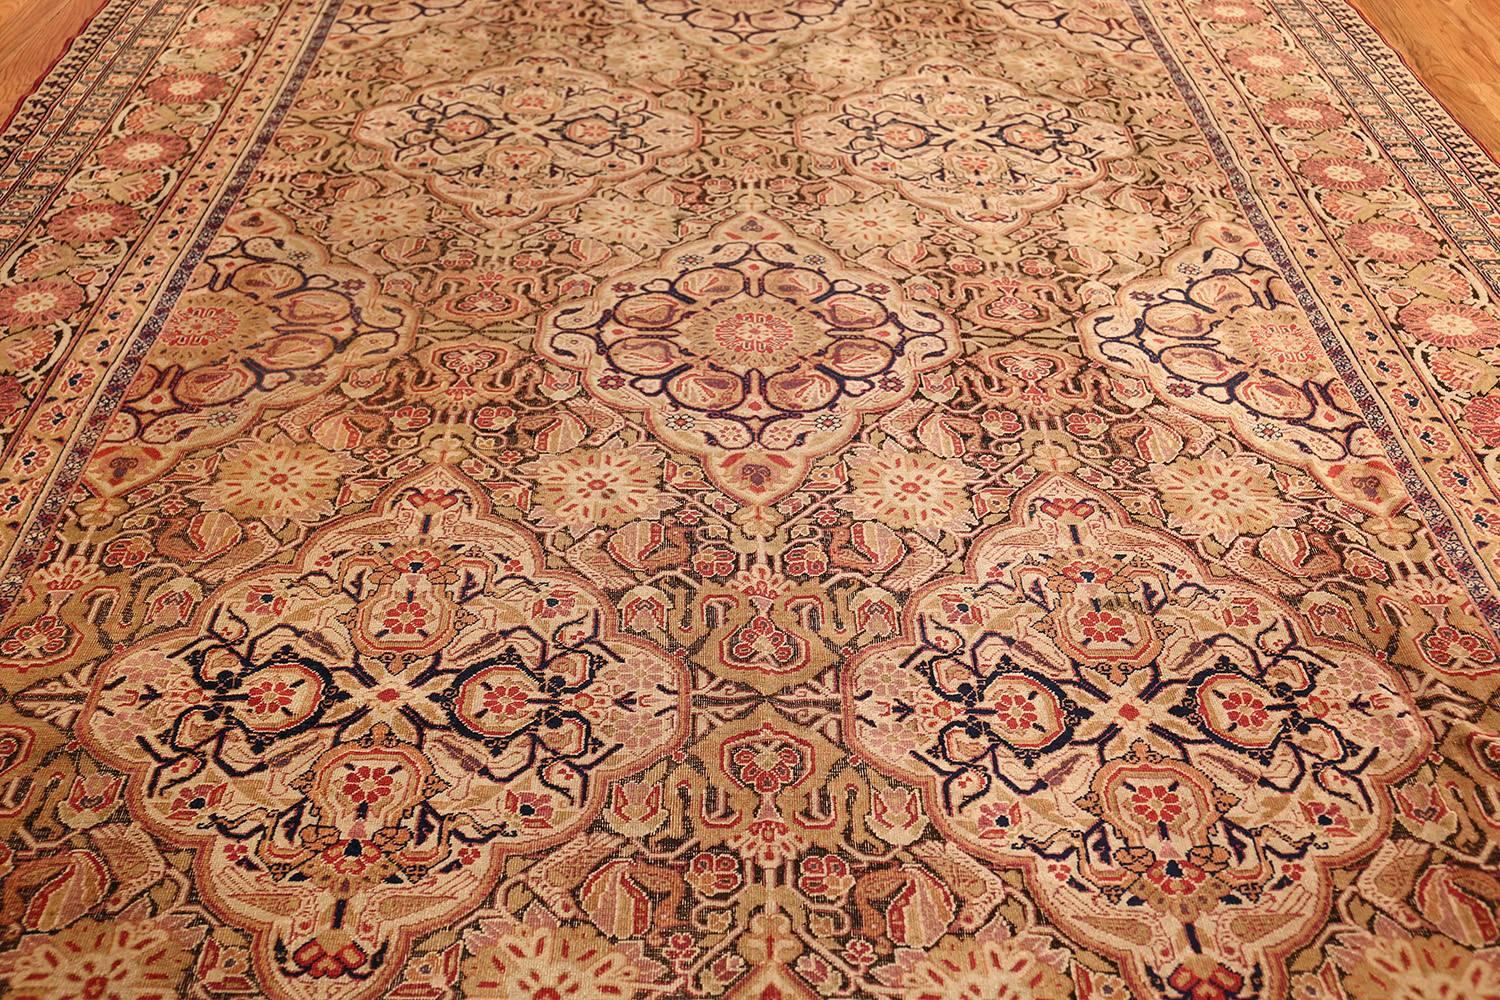 20th Century Antique Kerman Persian Rug. Size: 8 ft 9 in x 13 ft 1 in (2.67 m x 3.99 m)